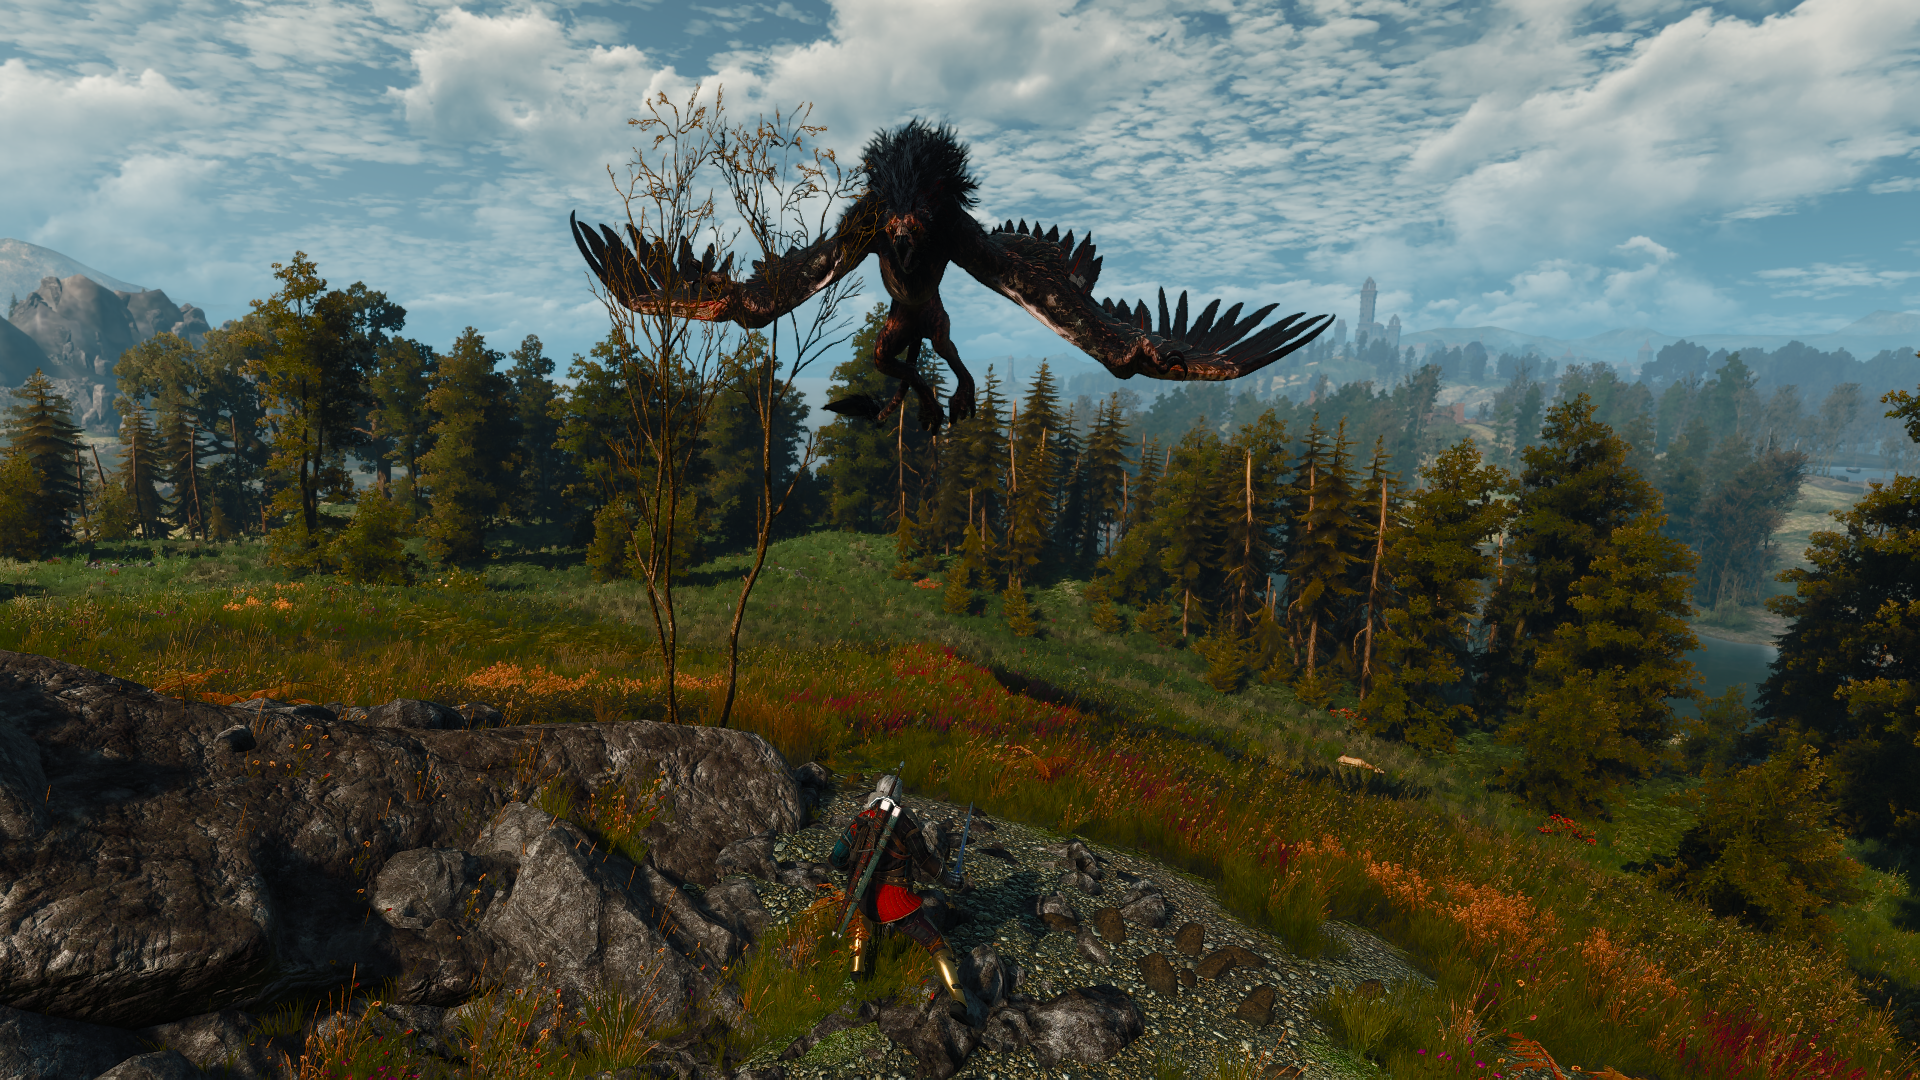 The Witcher The Witcher 3 Wild Hunt The Witcher 3 Wild Hunt Blood And Wine Video Game Art Video Game 1920x1080